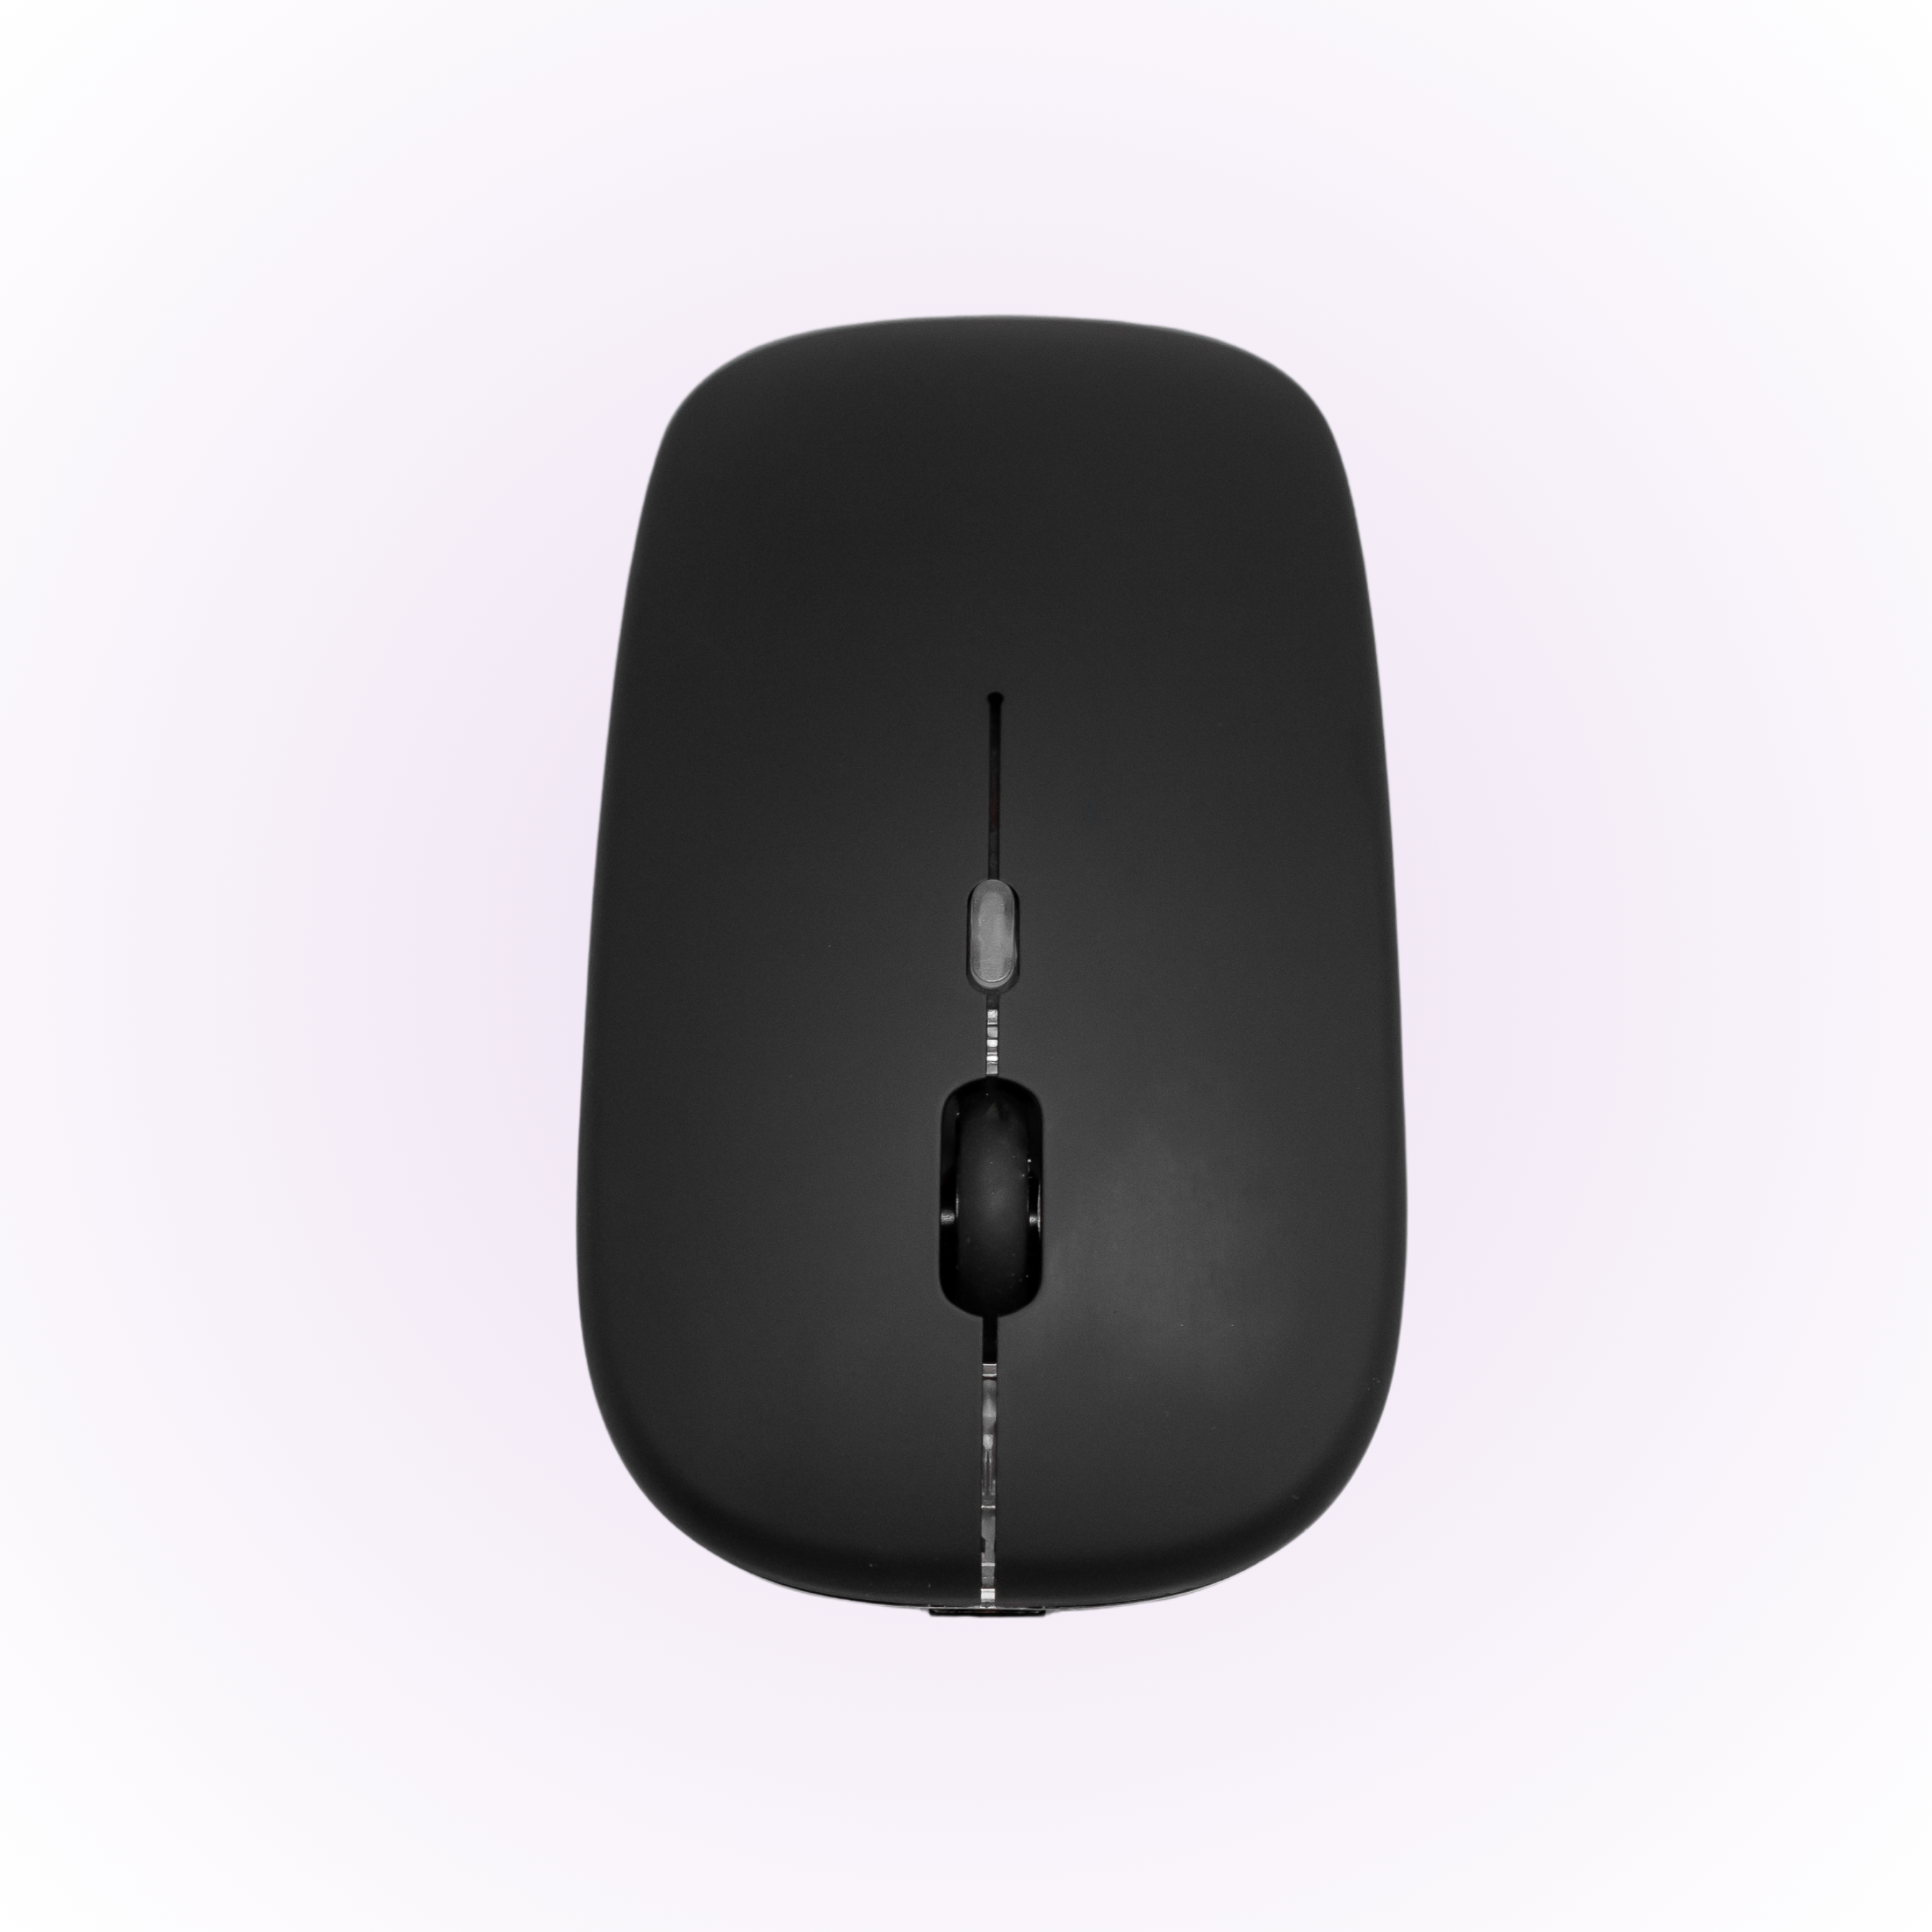 straight black bluetooth mouse facing on white background